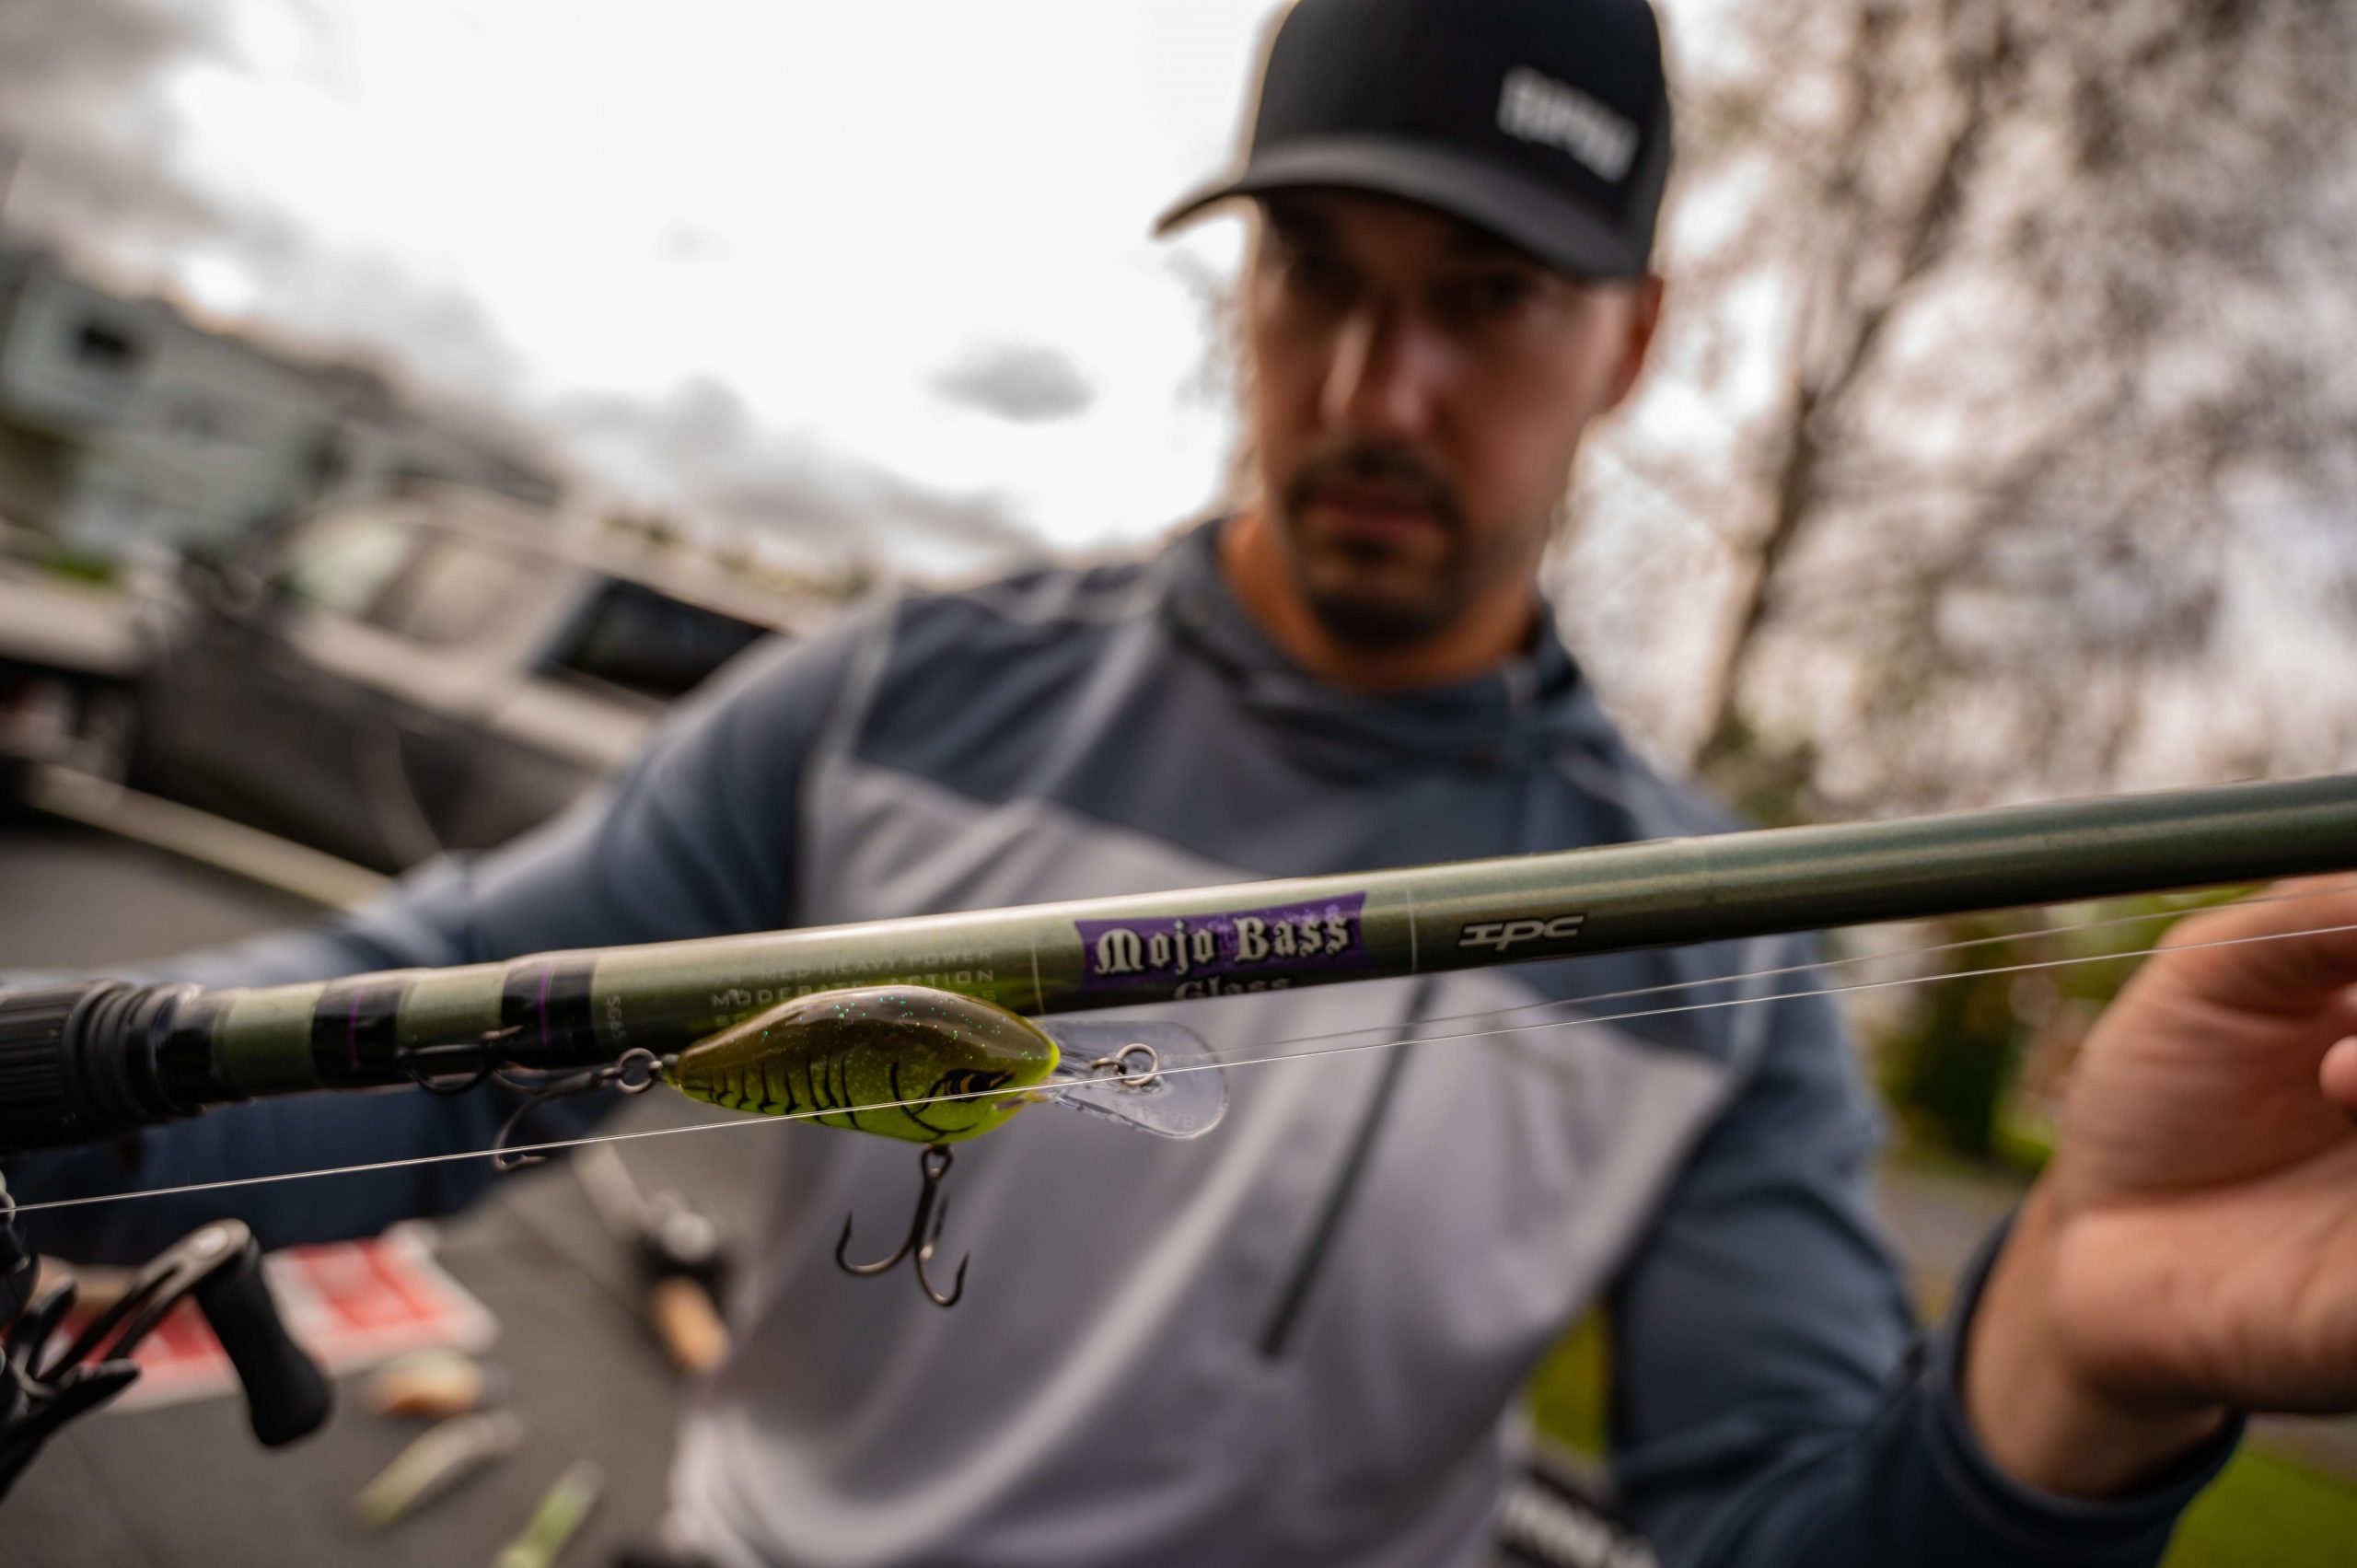 St. Croix Mojo Glass Rod is the choice to toss the DT 10 around. 